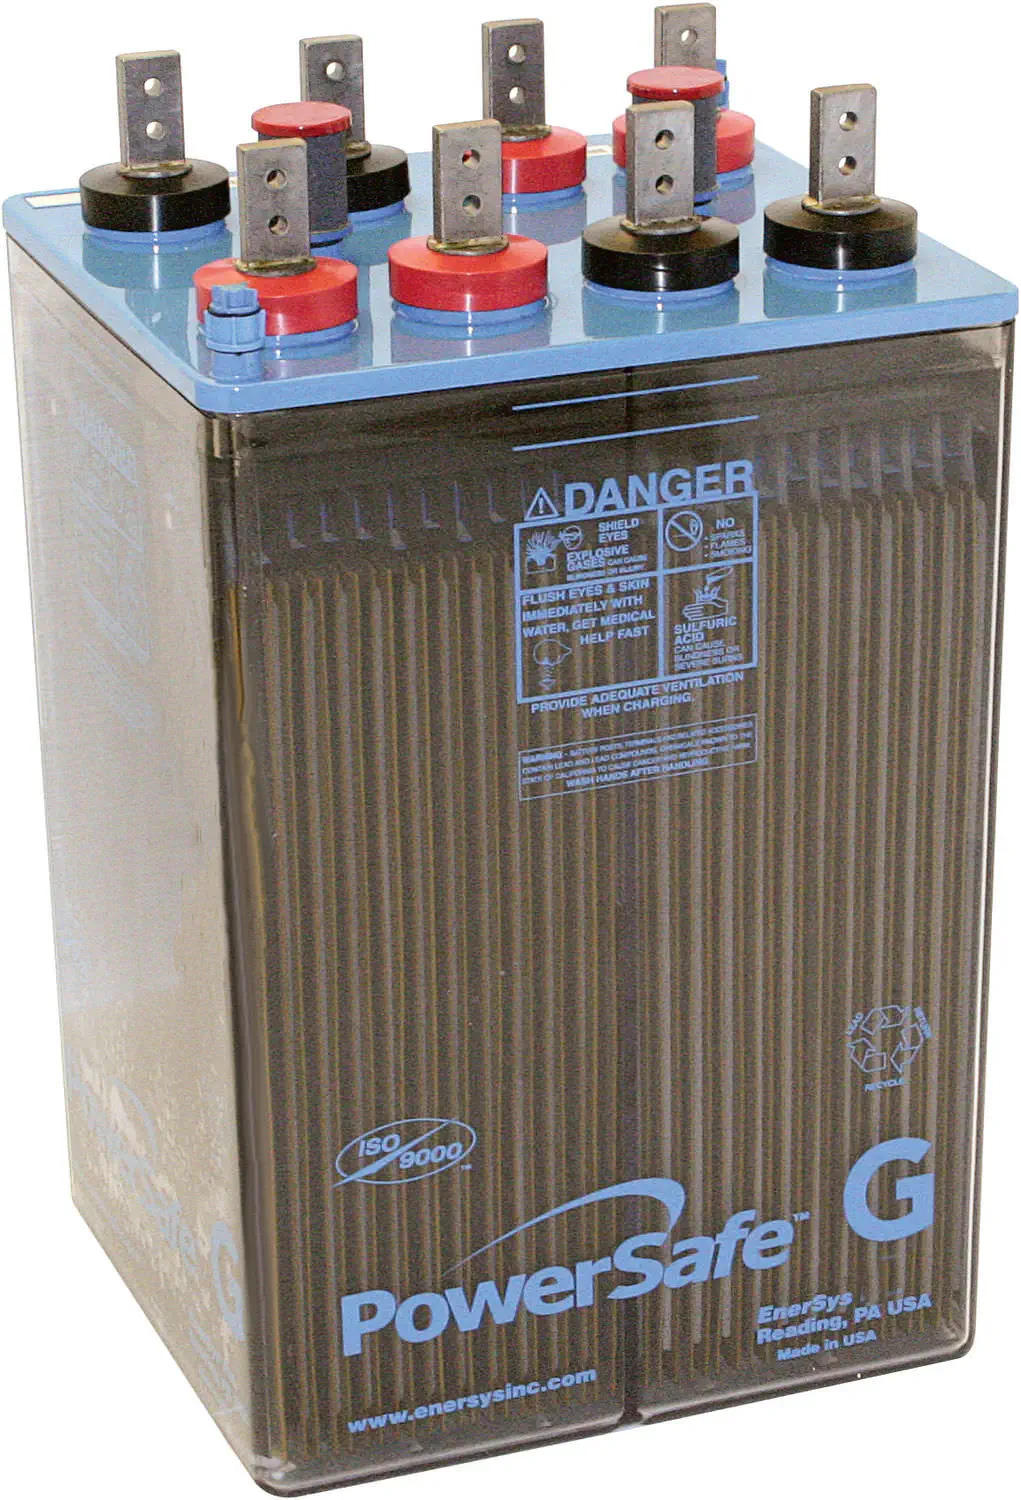 EnerSys PowerSafe GN-39